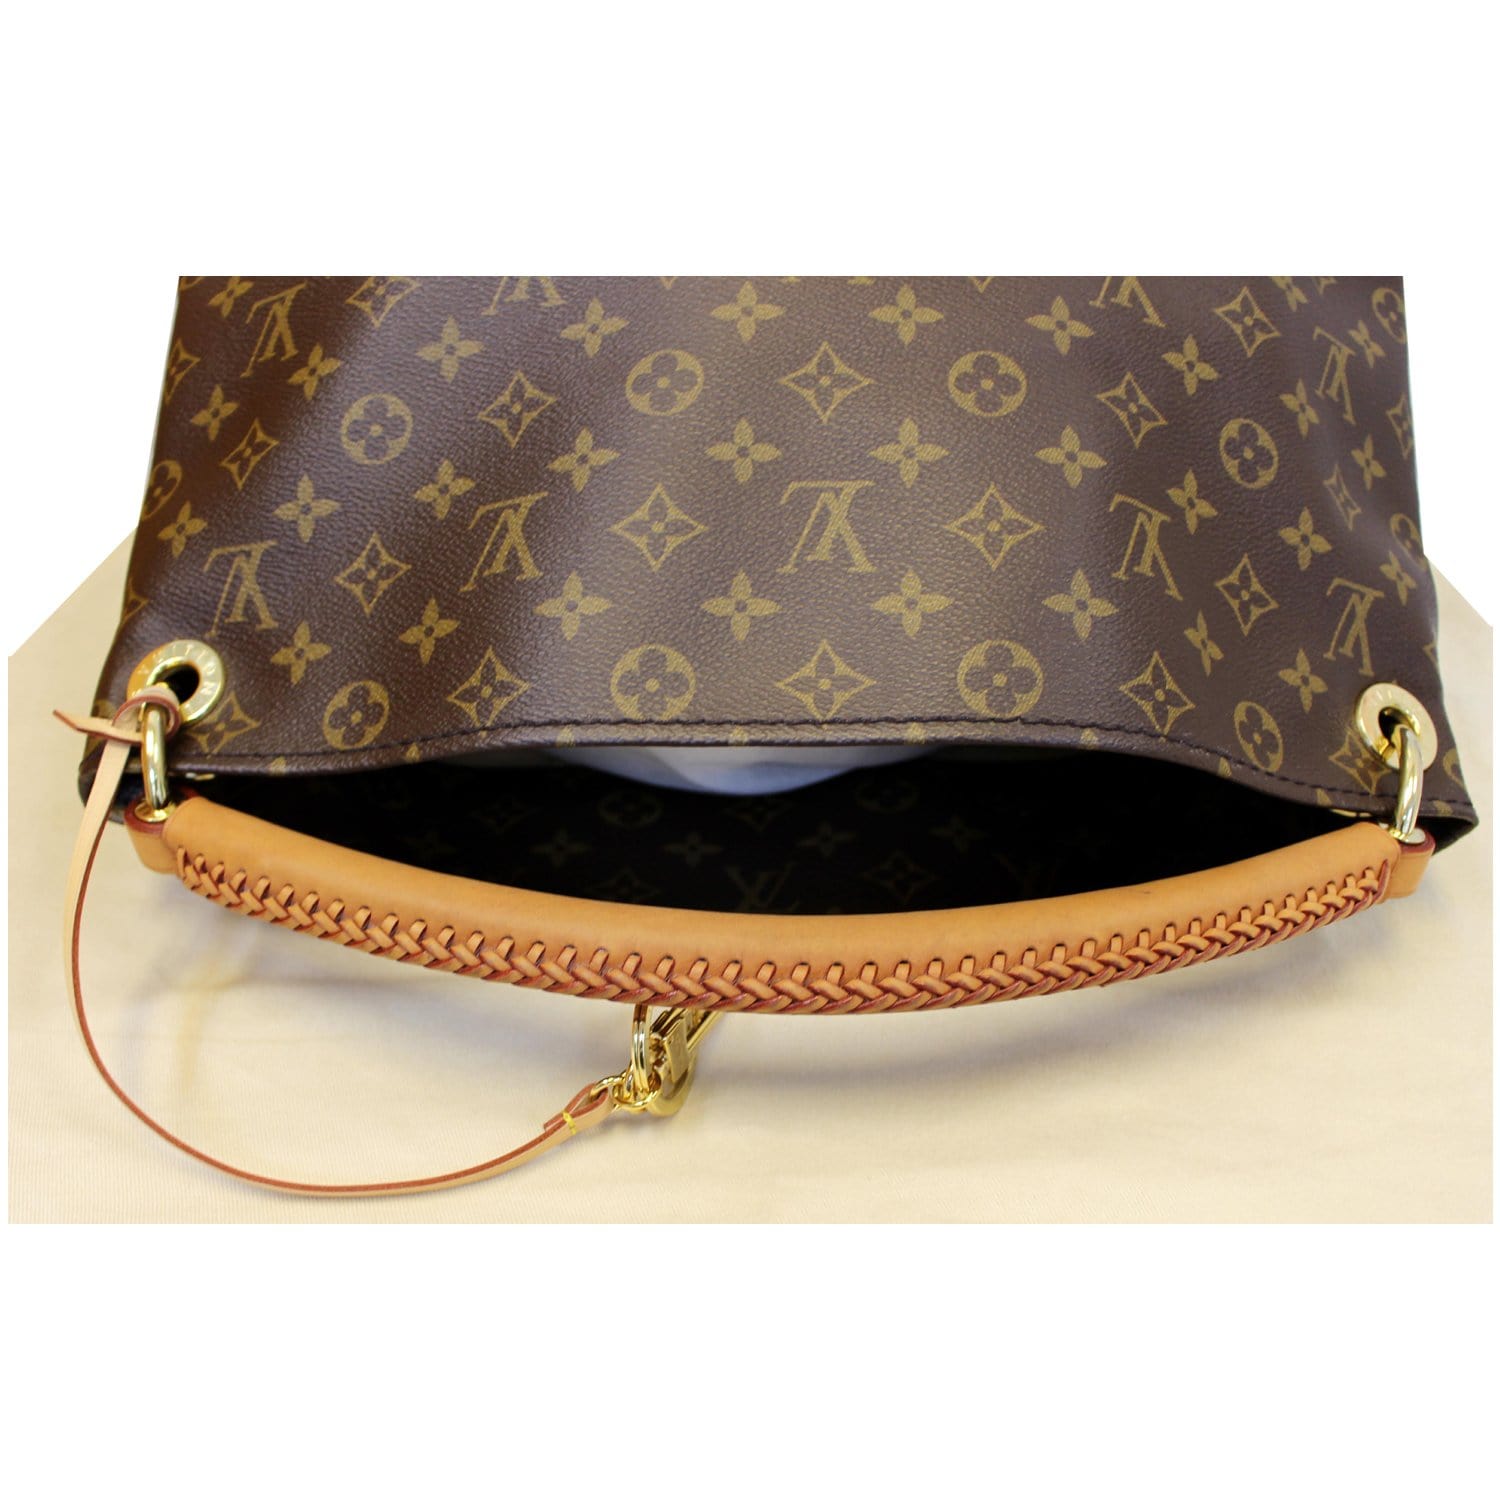 Discover Timeless Elegance: Louis Vuitton Artsy mm at Dress Raleigh